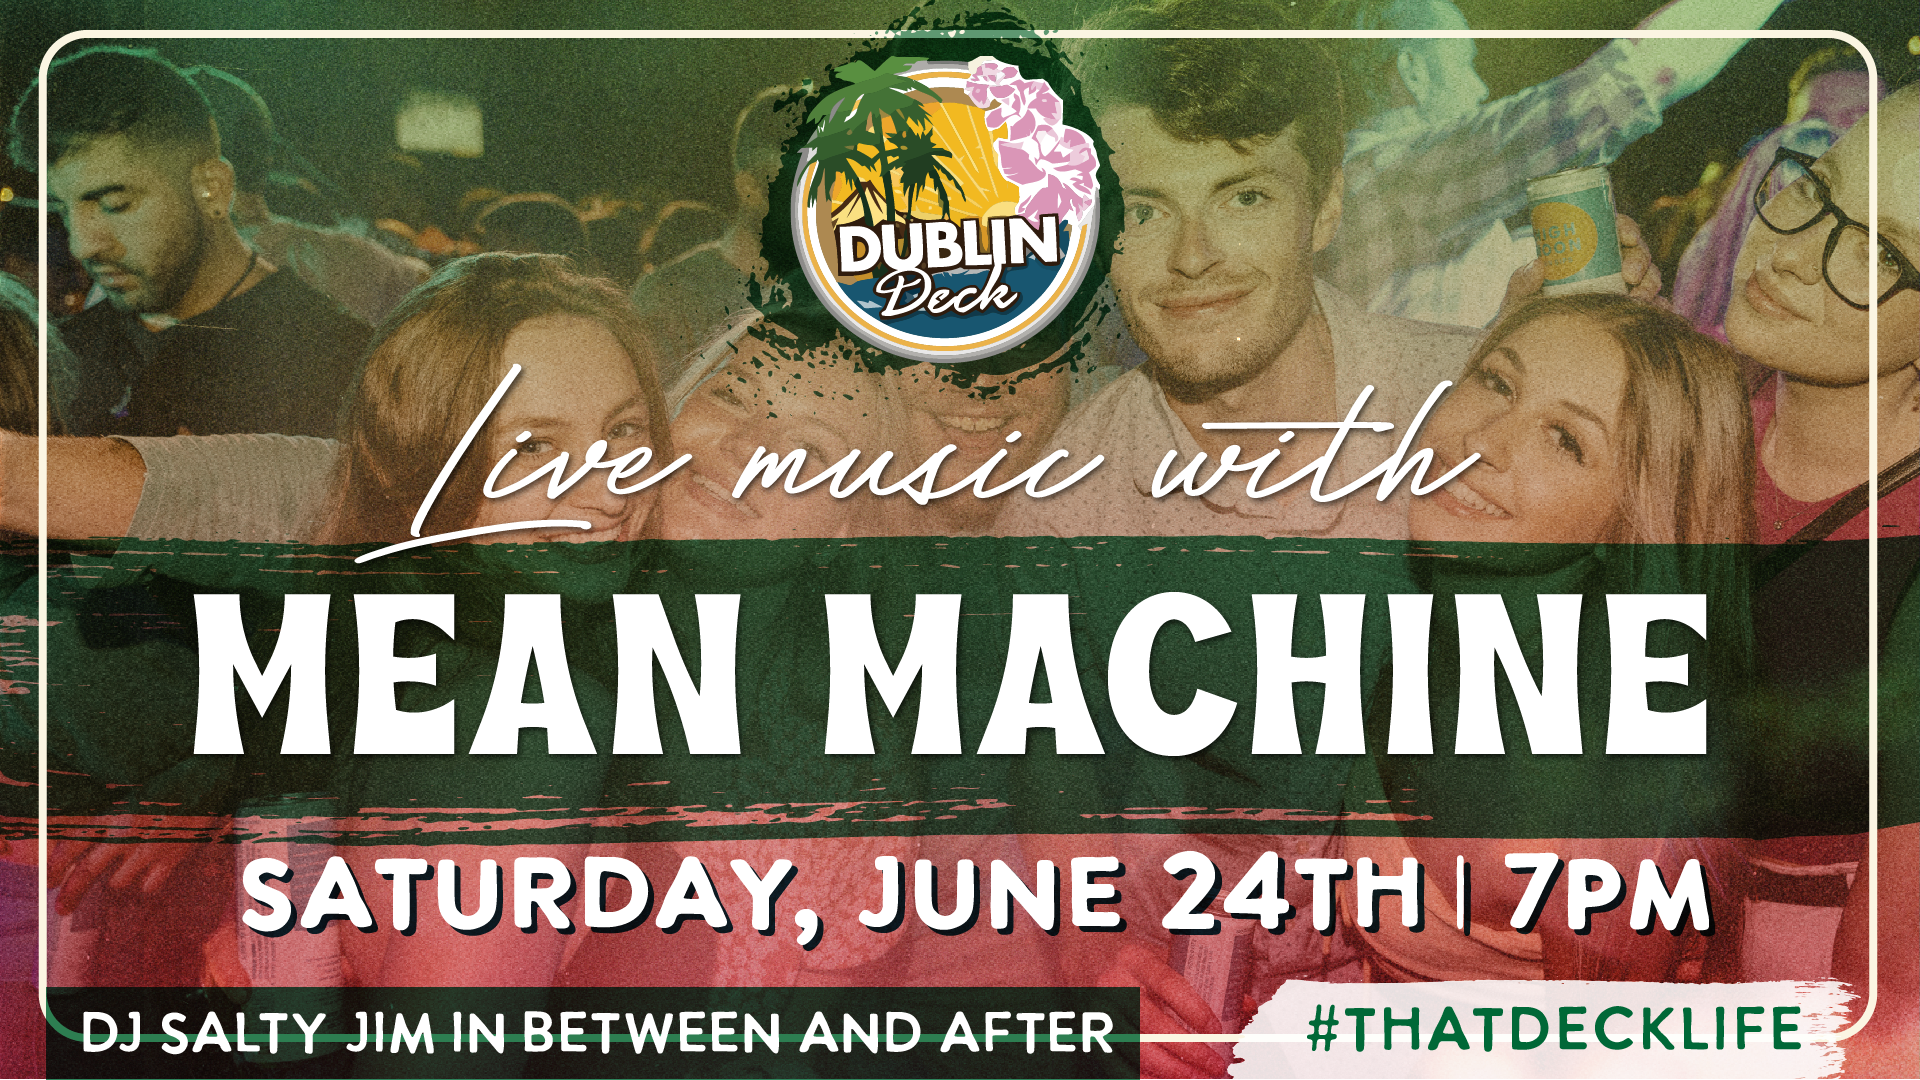 Catch Mean Machine hittin' the stage at Dublin Deck! Music starts at 7PM